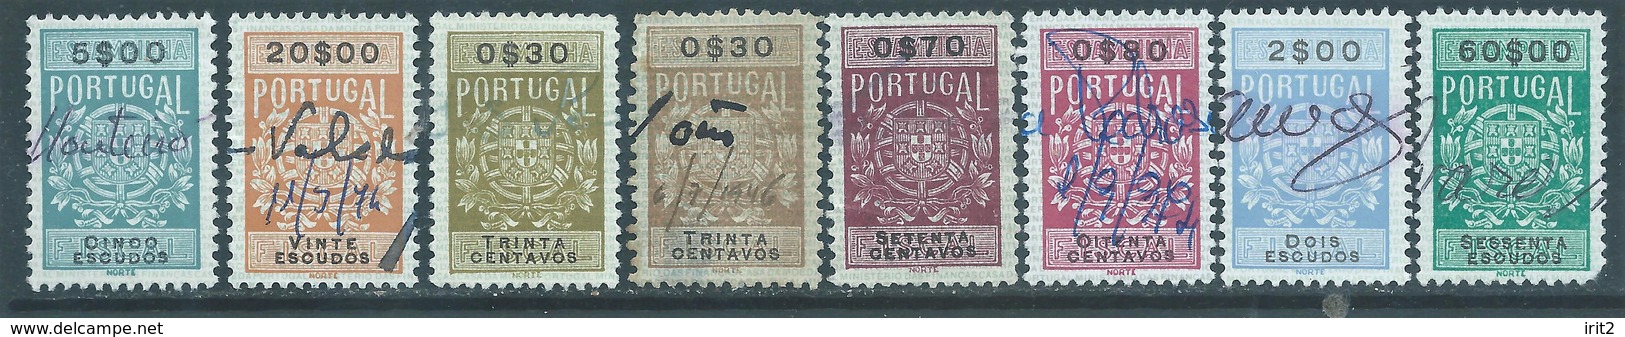 PORTUGAL Portogallo,1878 Revenue Stamps Tasse Taxes,Used - Gebraucht